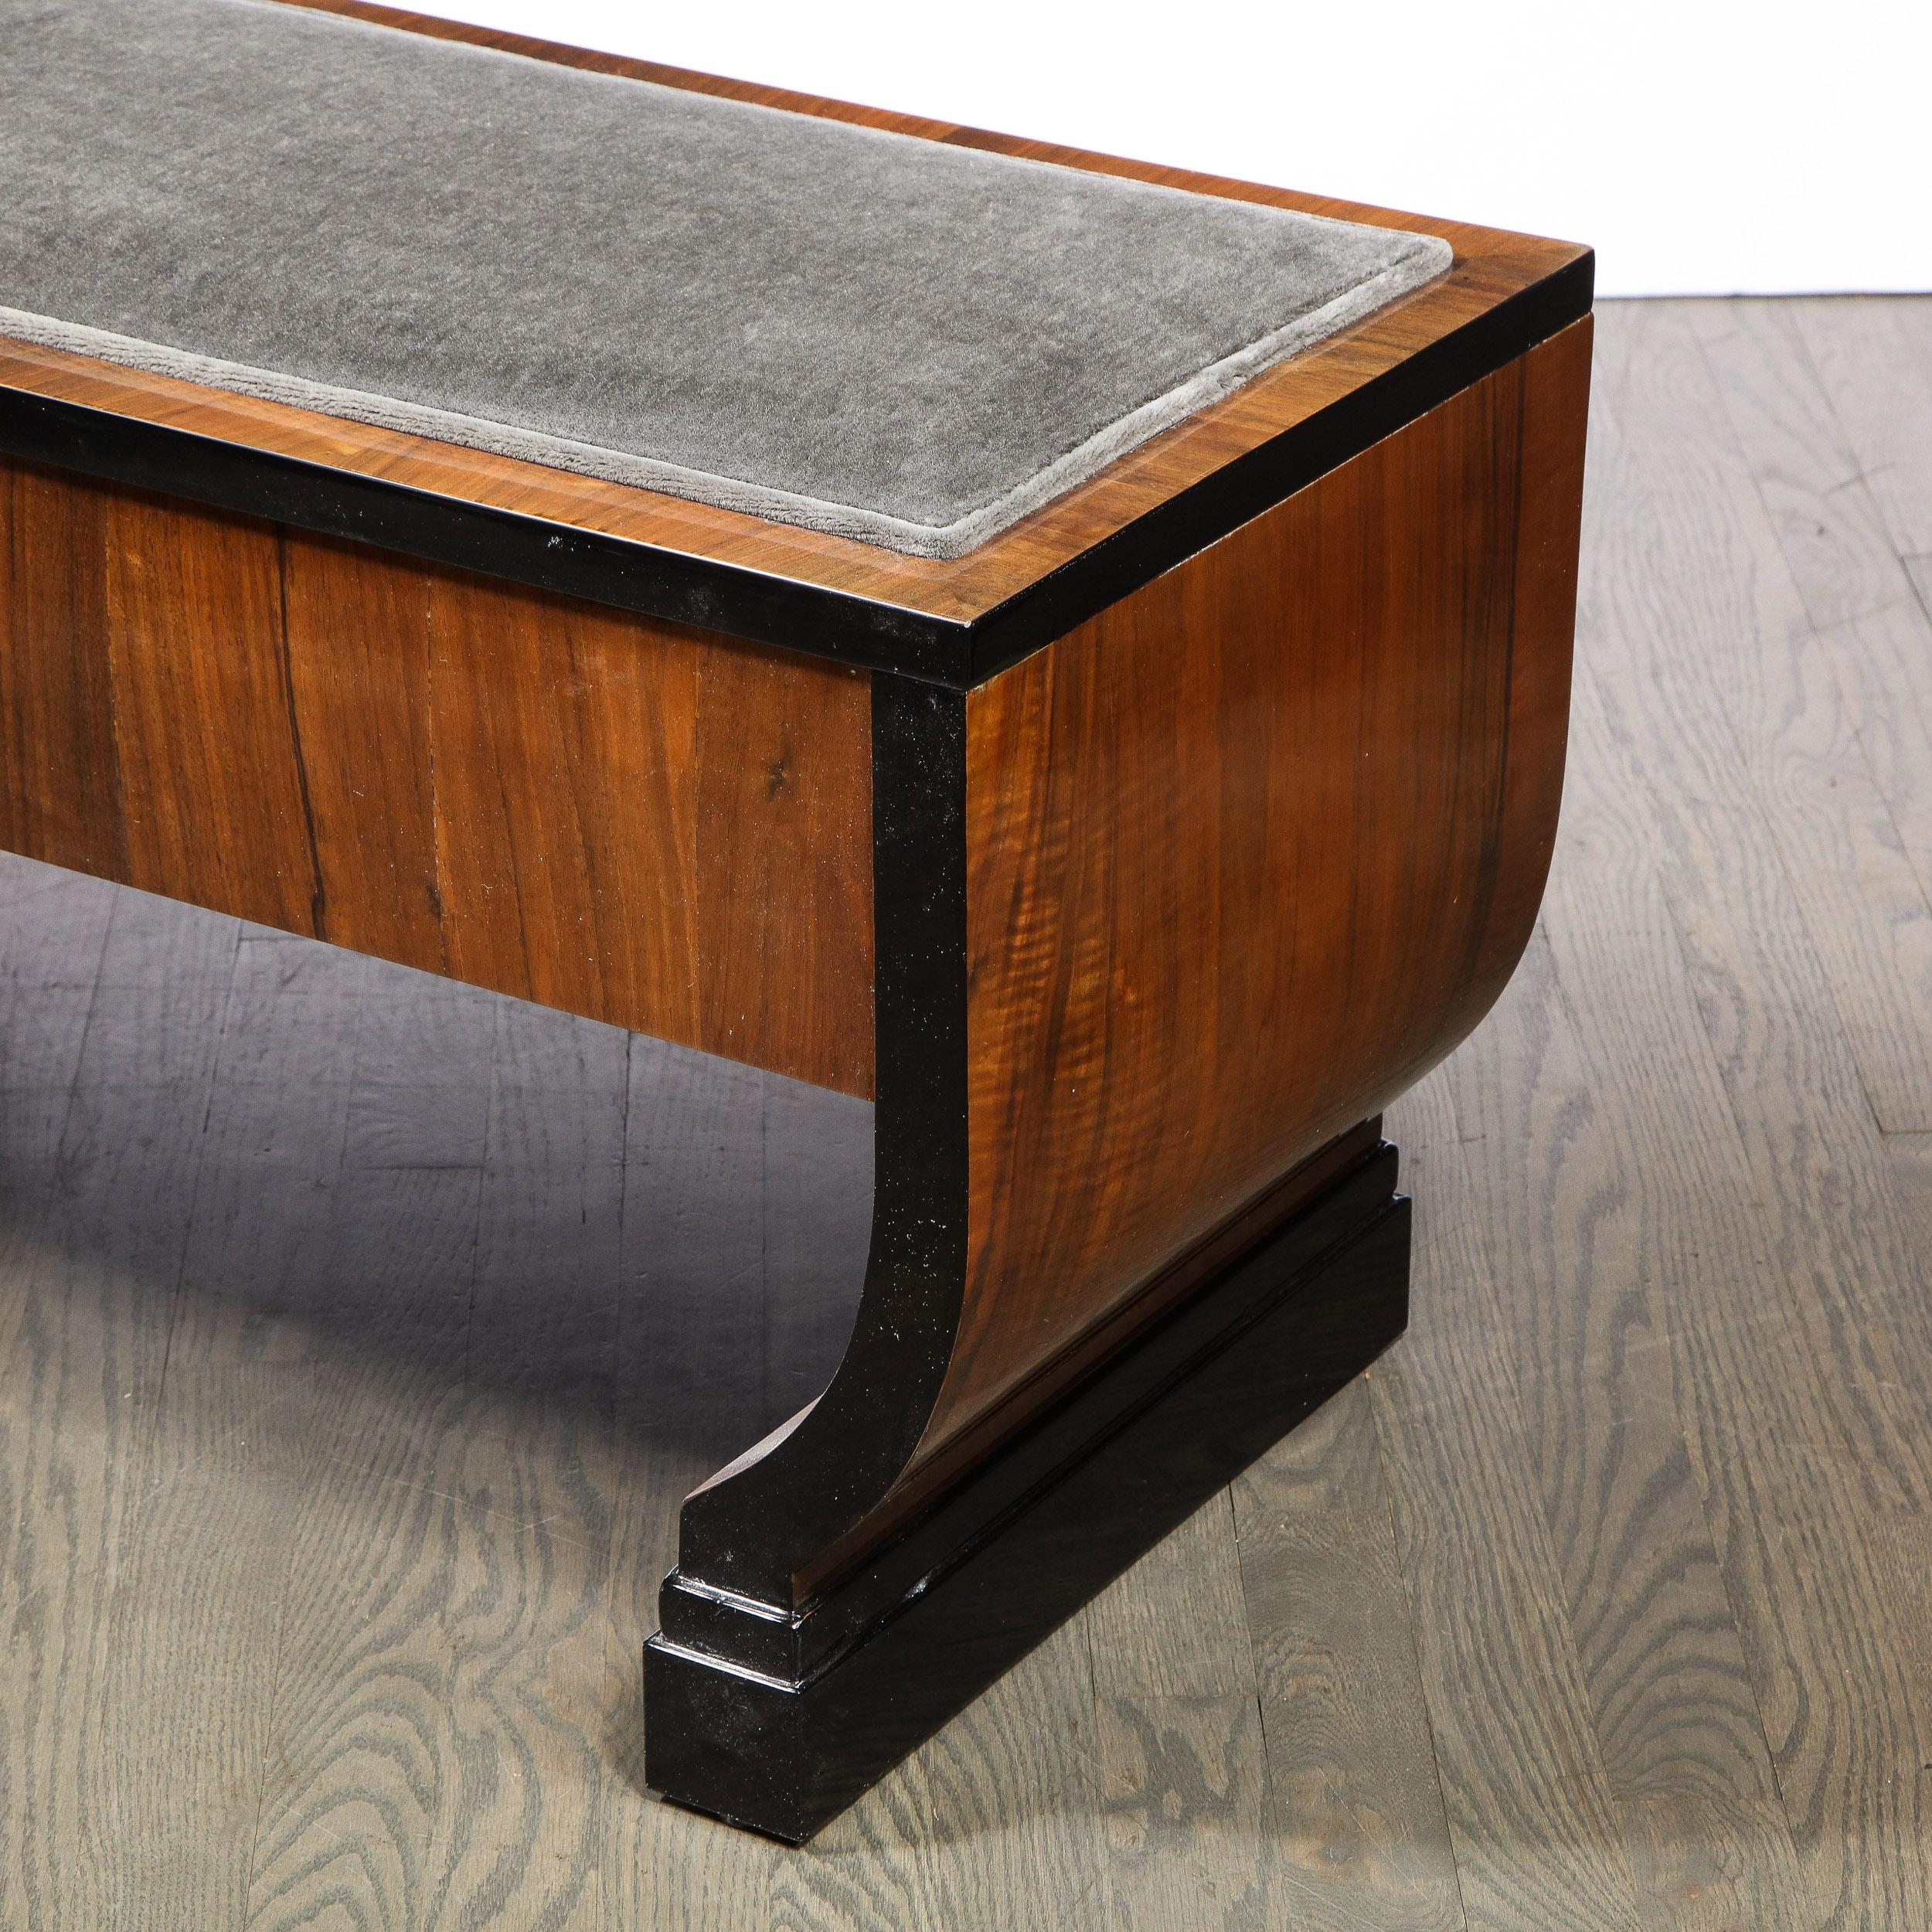 American Art Deco Machine Age Streamline Lacquer, Bookmatched Walnut & Slate Mohair Bench